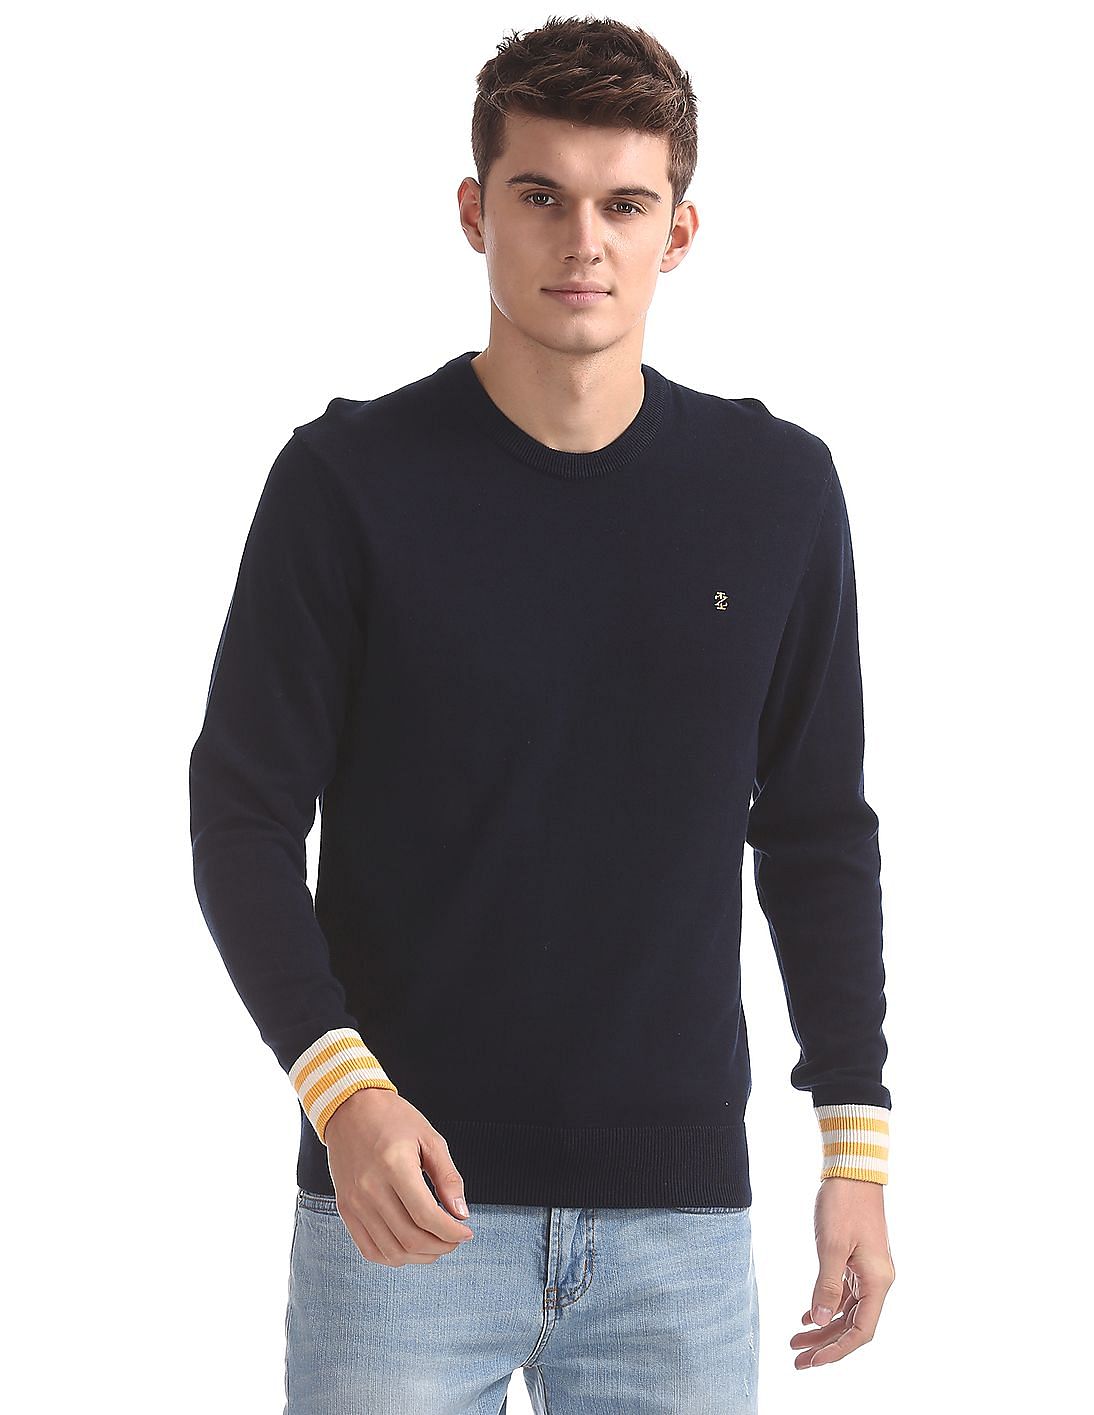 Buy Men Solid Crew Neck Sweater online at NNNOW.com